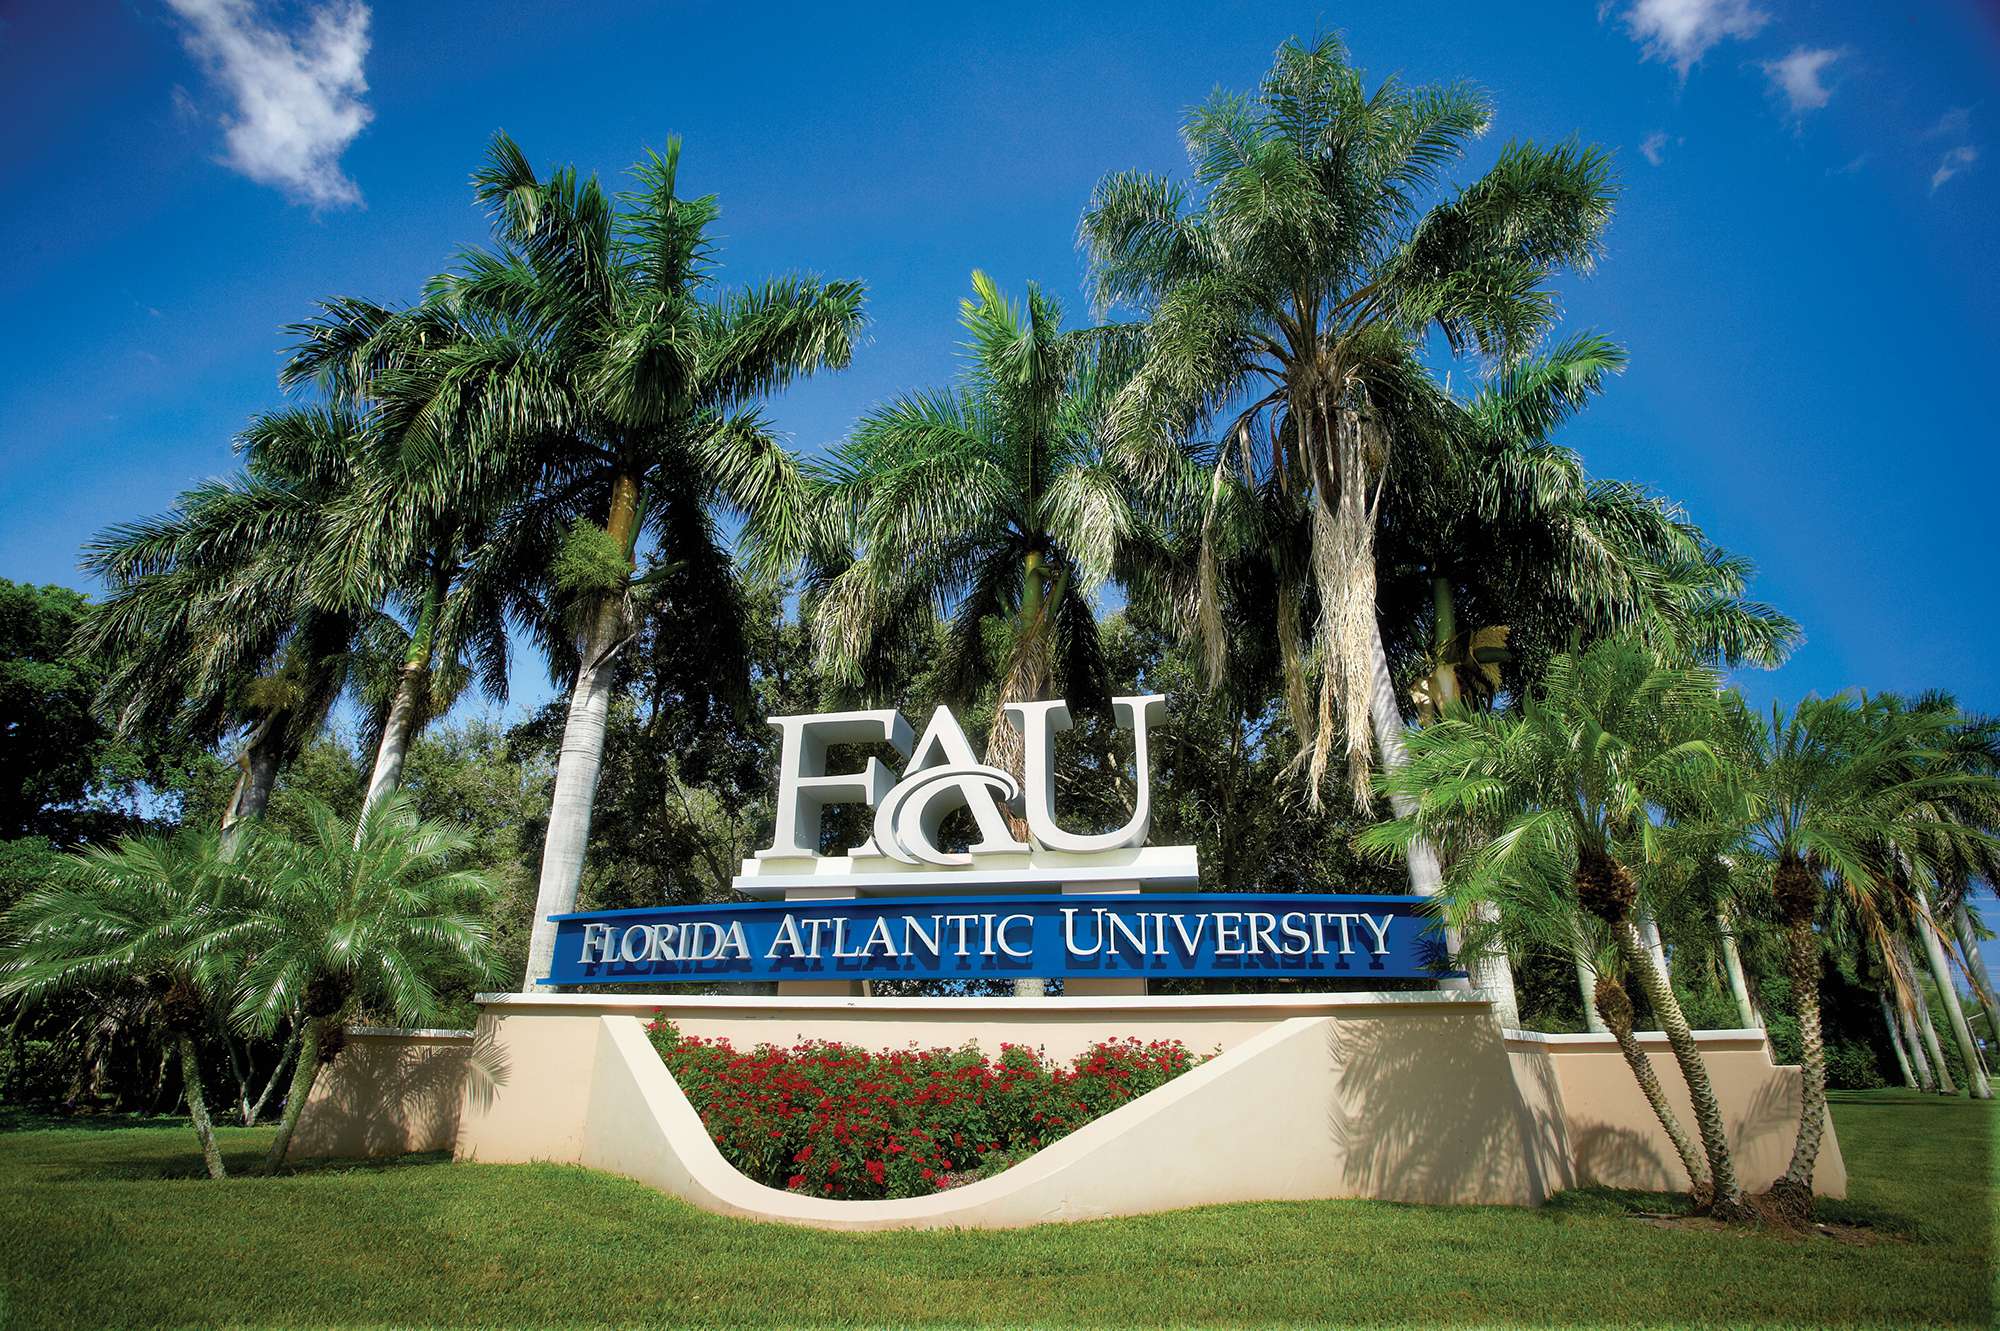 Listing of Colleges in Palm Beach